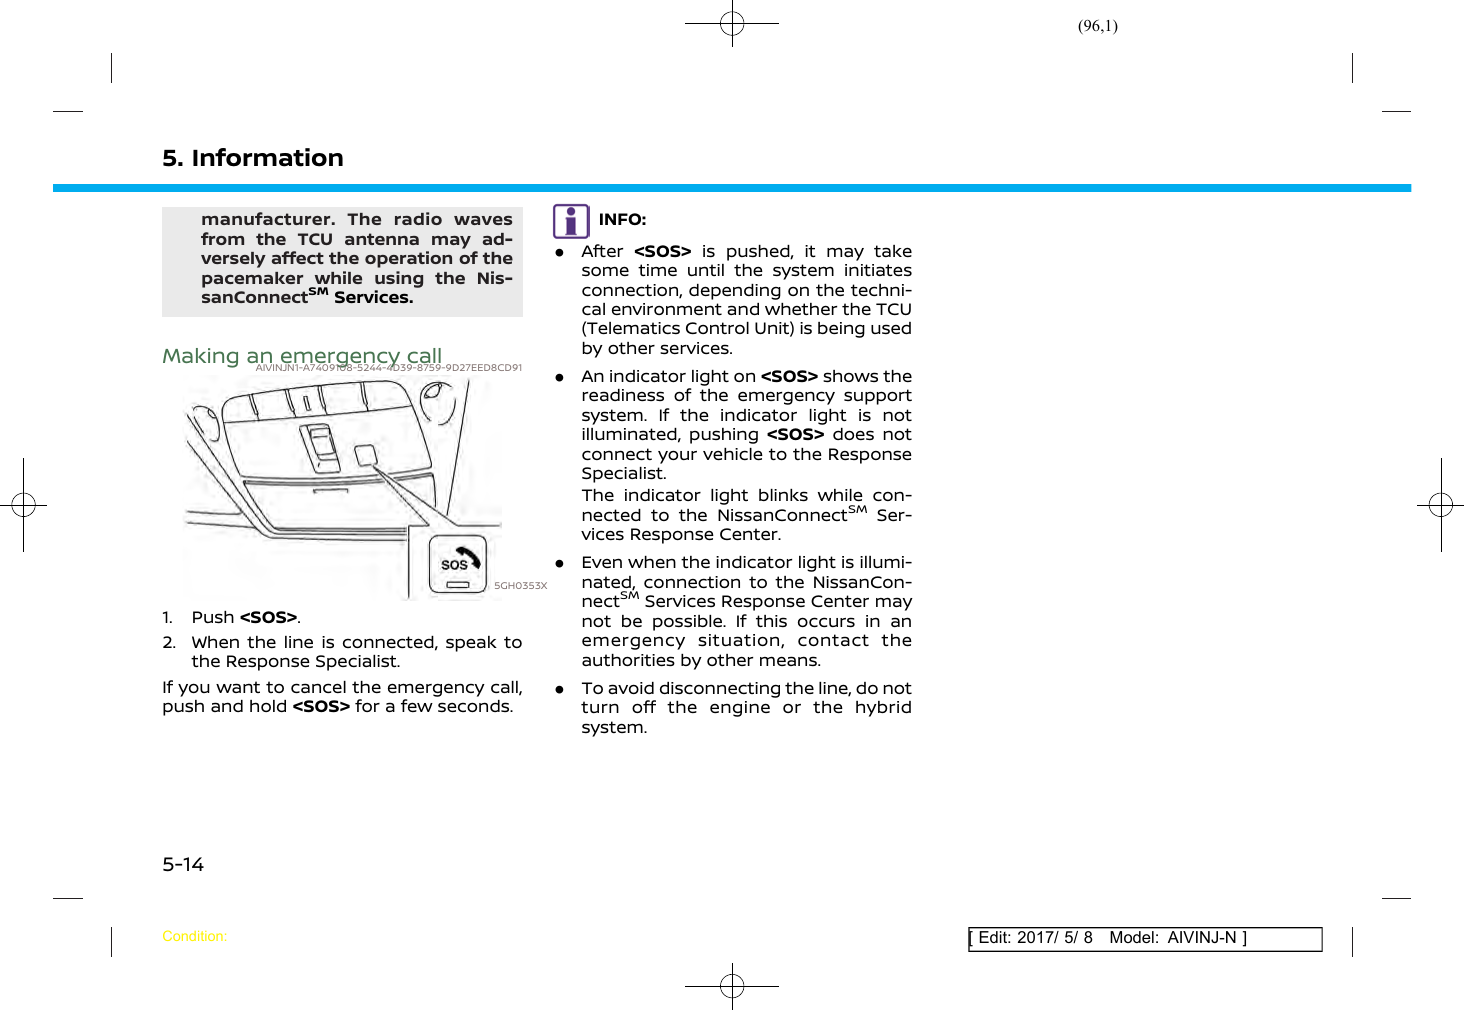 Page 96 of Robert Bosch Car Multimedia AIVICMFB0 Navigation System with Bluetooth and WLAN User Manual